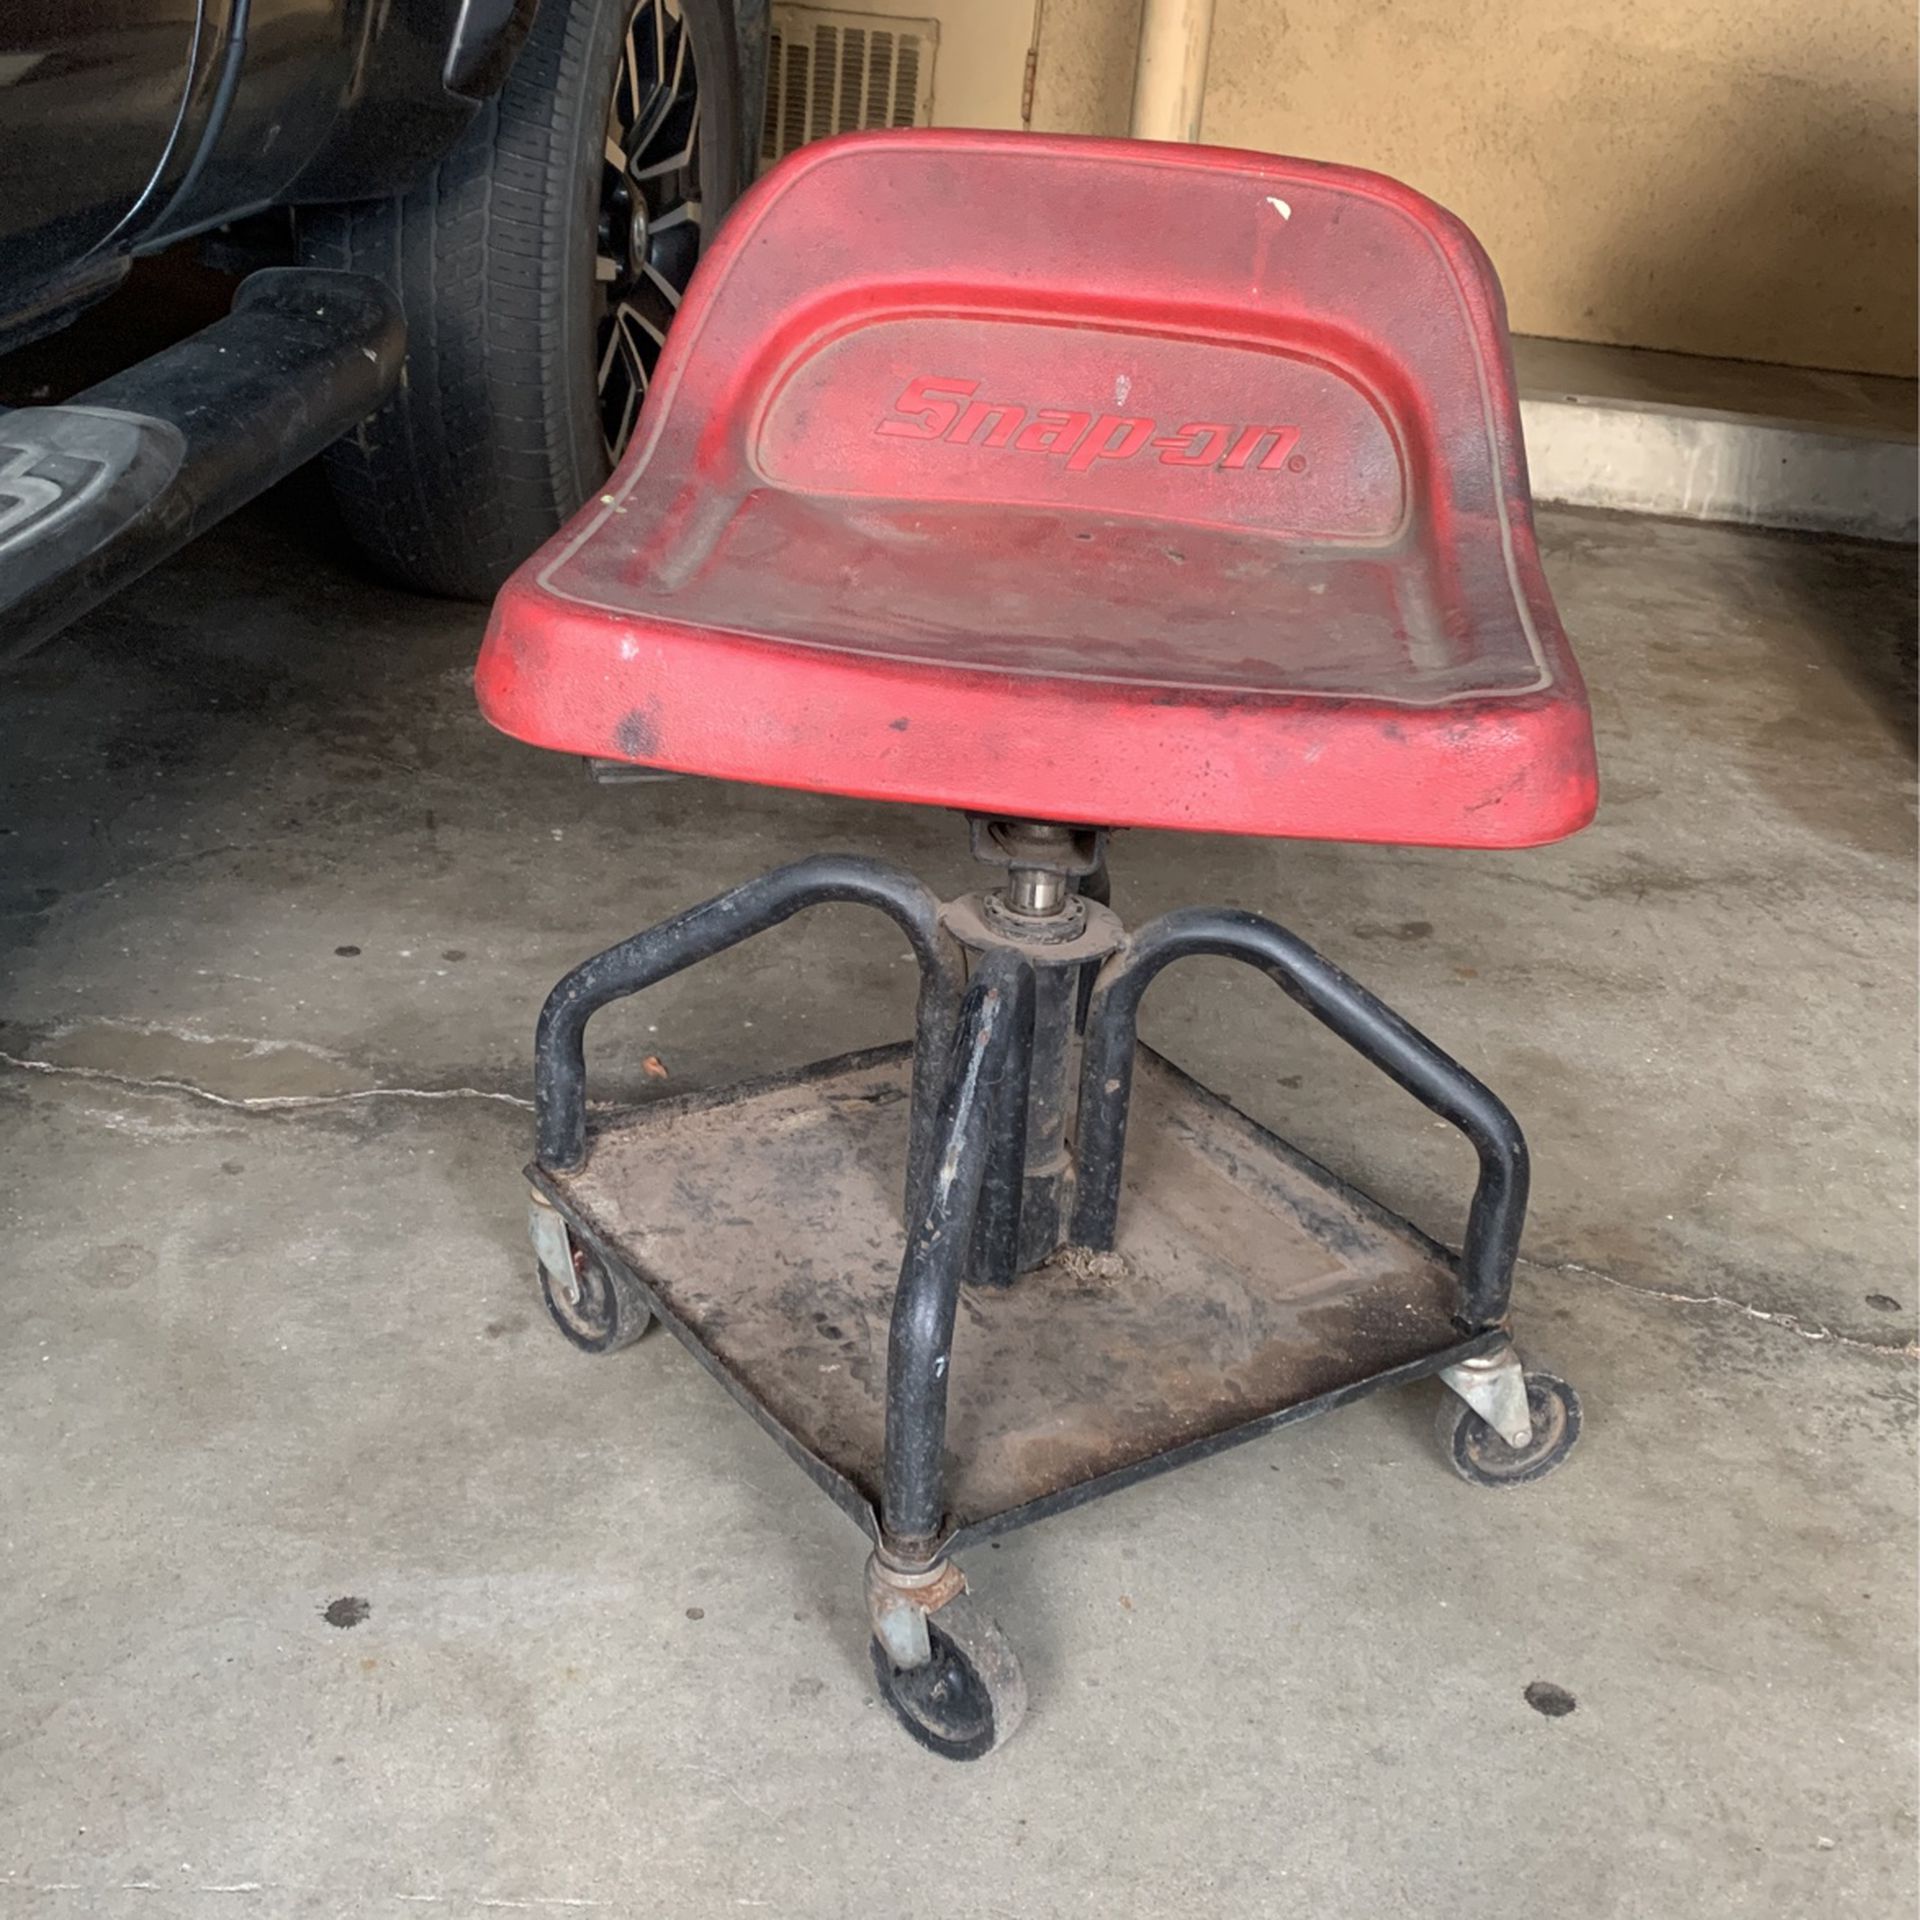 Vintage 2001 SNAP ON Rolling Mechanic Shop Stool Creeper Red Cushion Wheel Tools